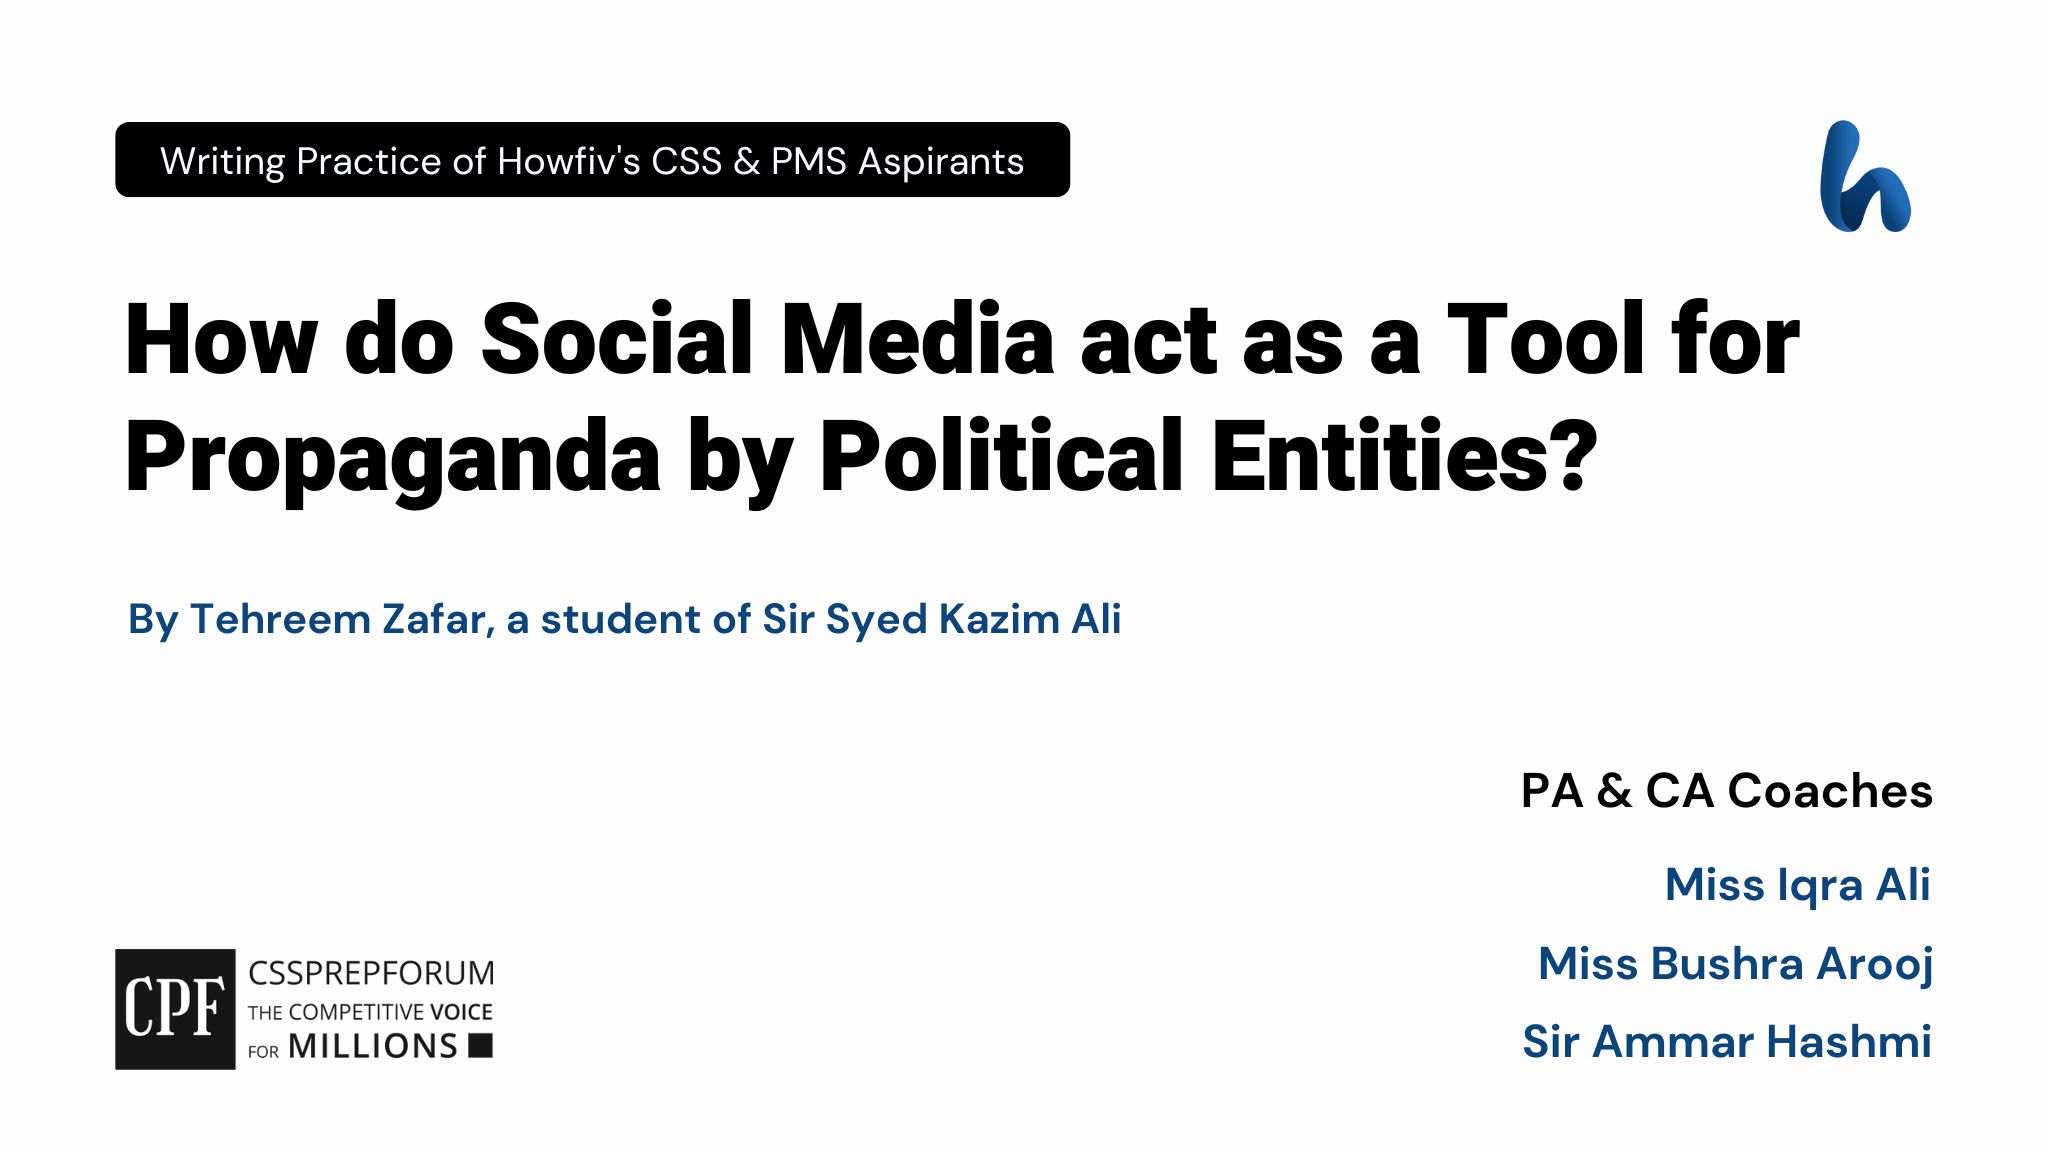 CSS Current Affairs article | Social Media as a Tool for Propaganda | is written by Tehreem Zafar under the supervision of Miss Iqra Ali...